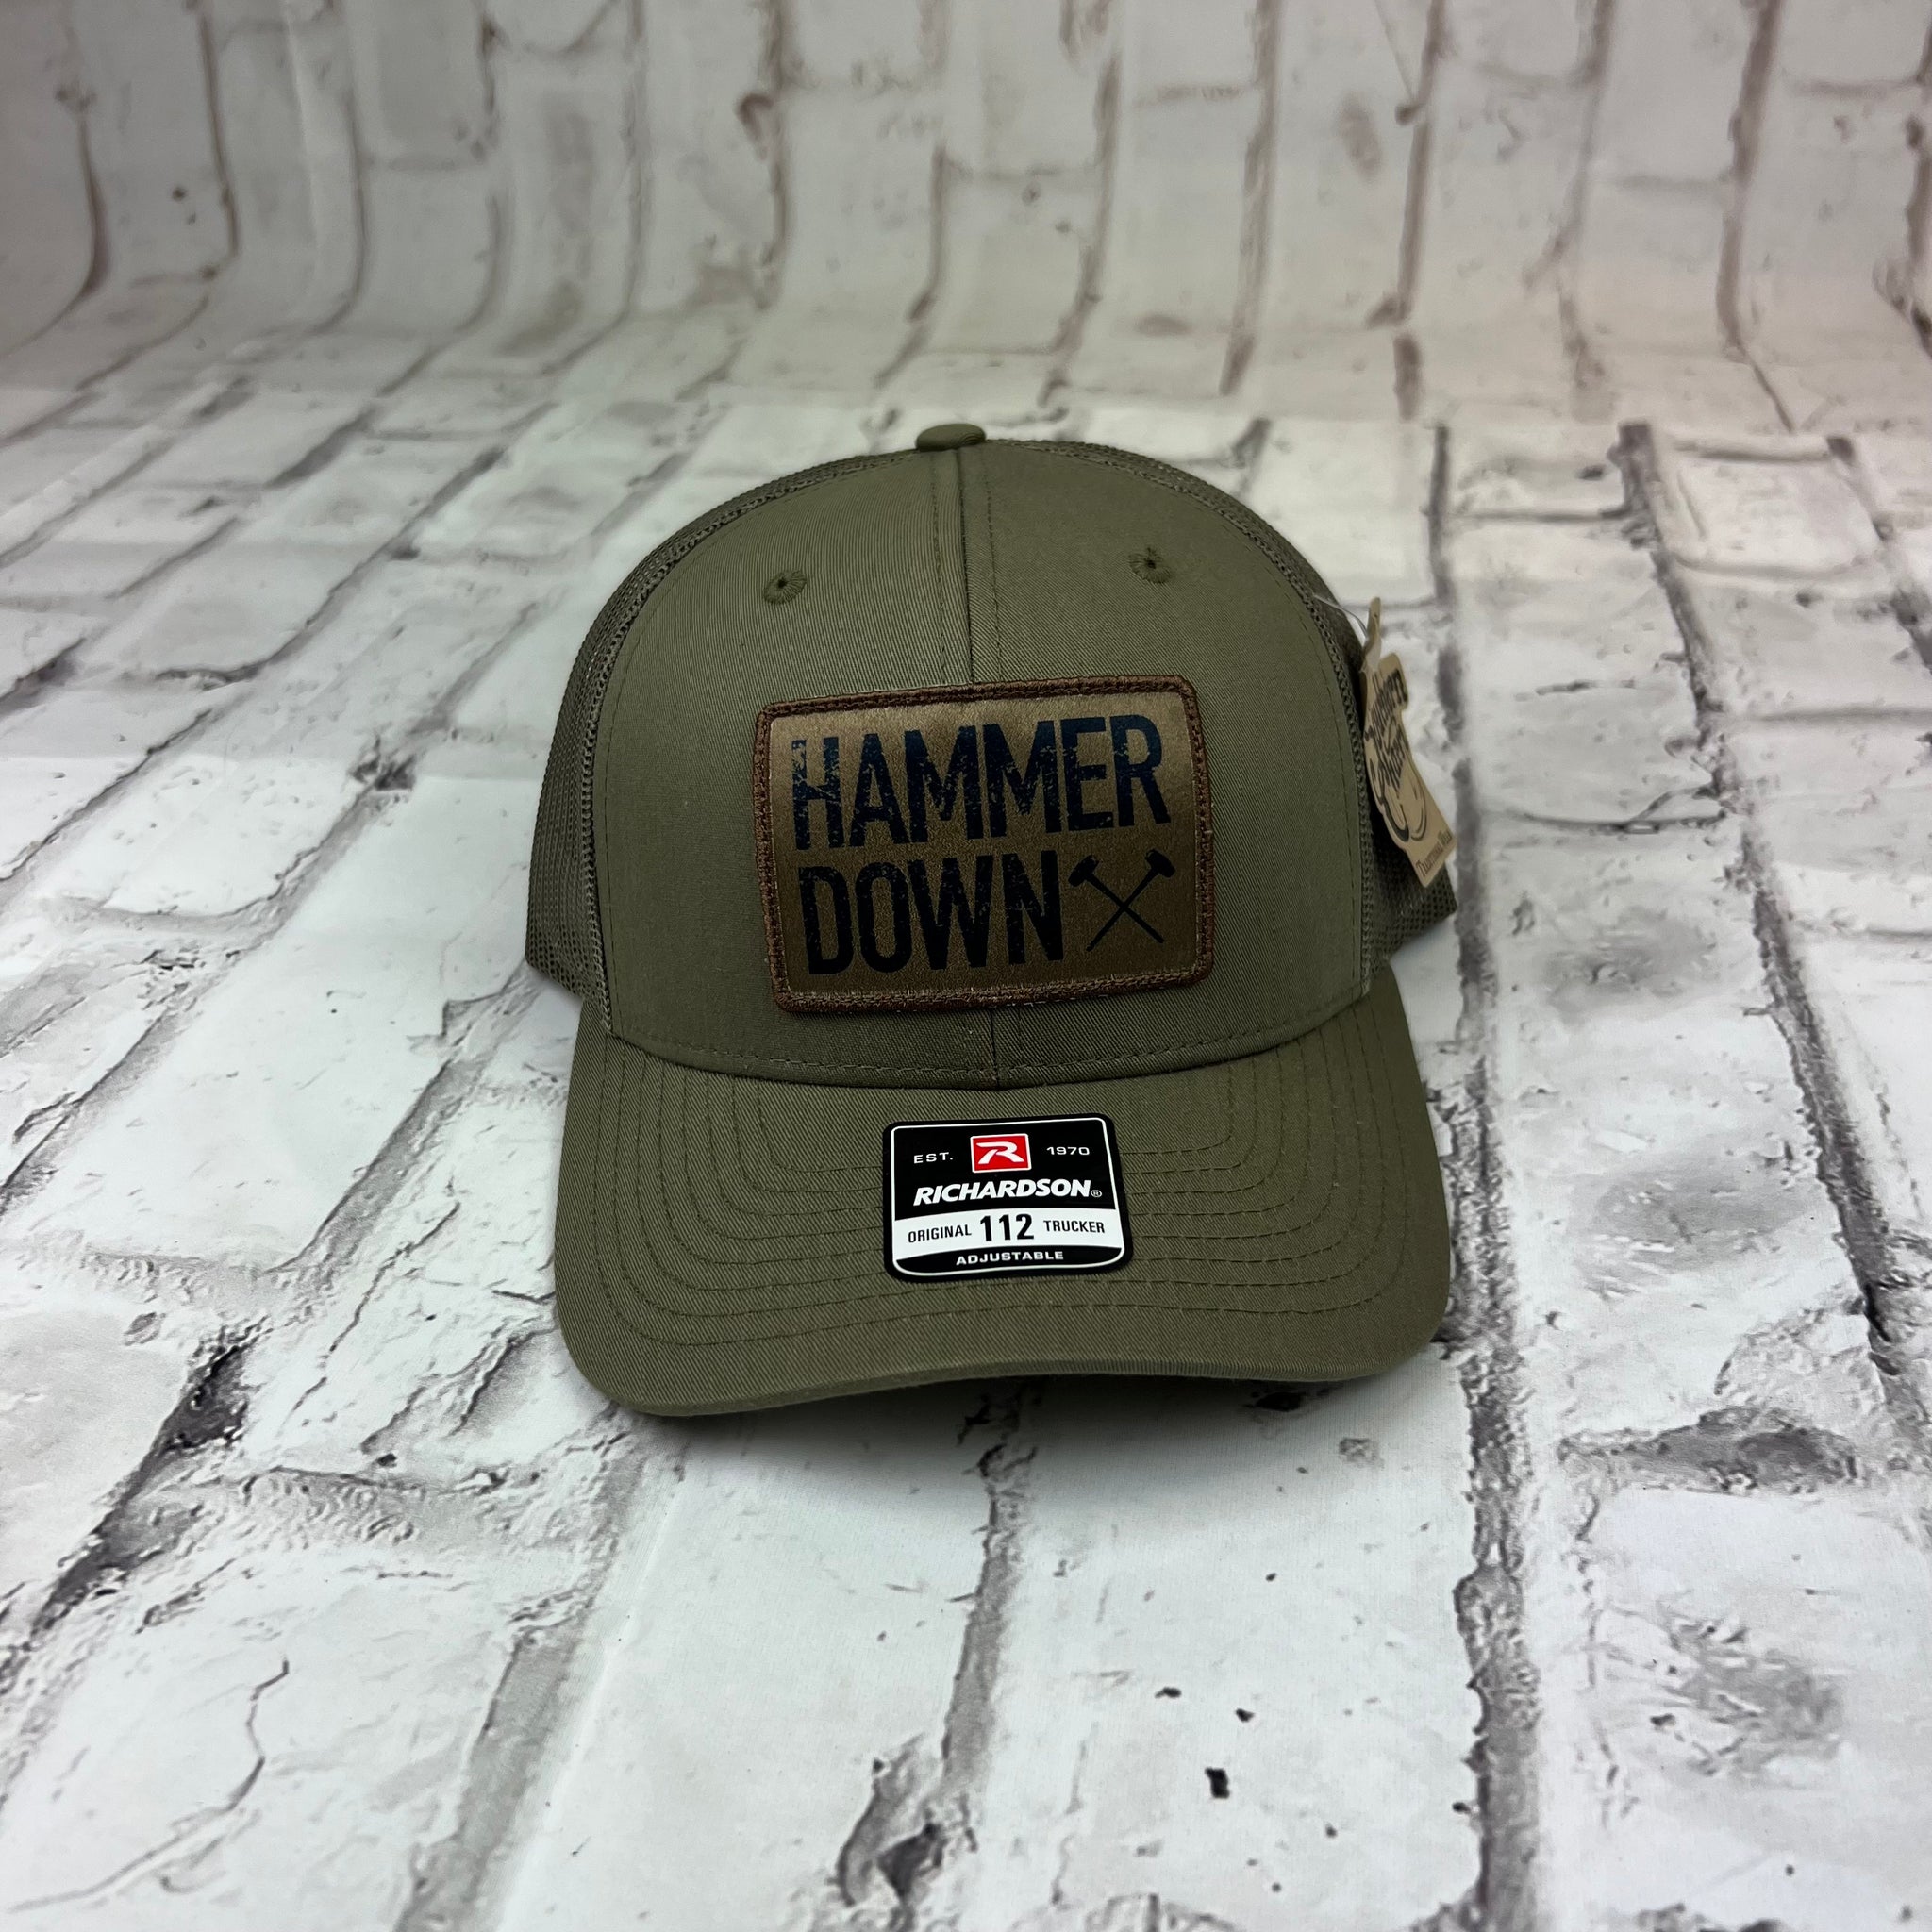 Hammer Down "Two Row" Hat - Loden with Leather Patch